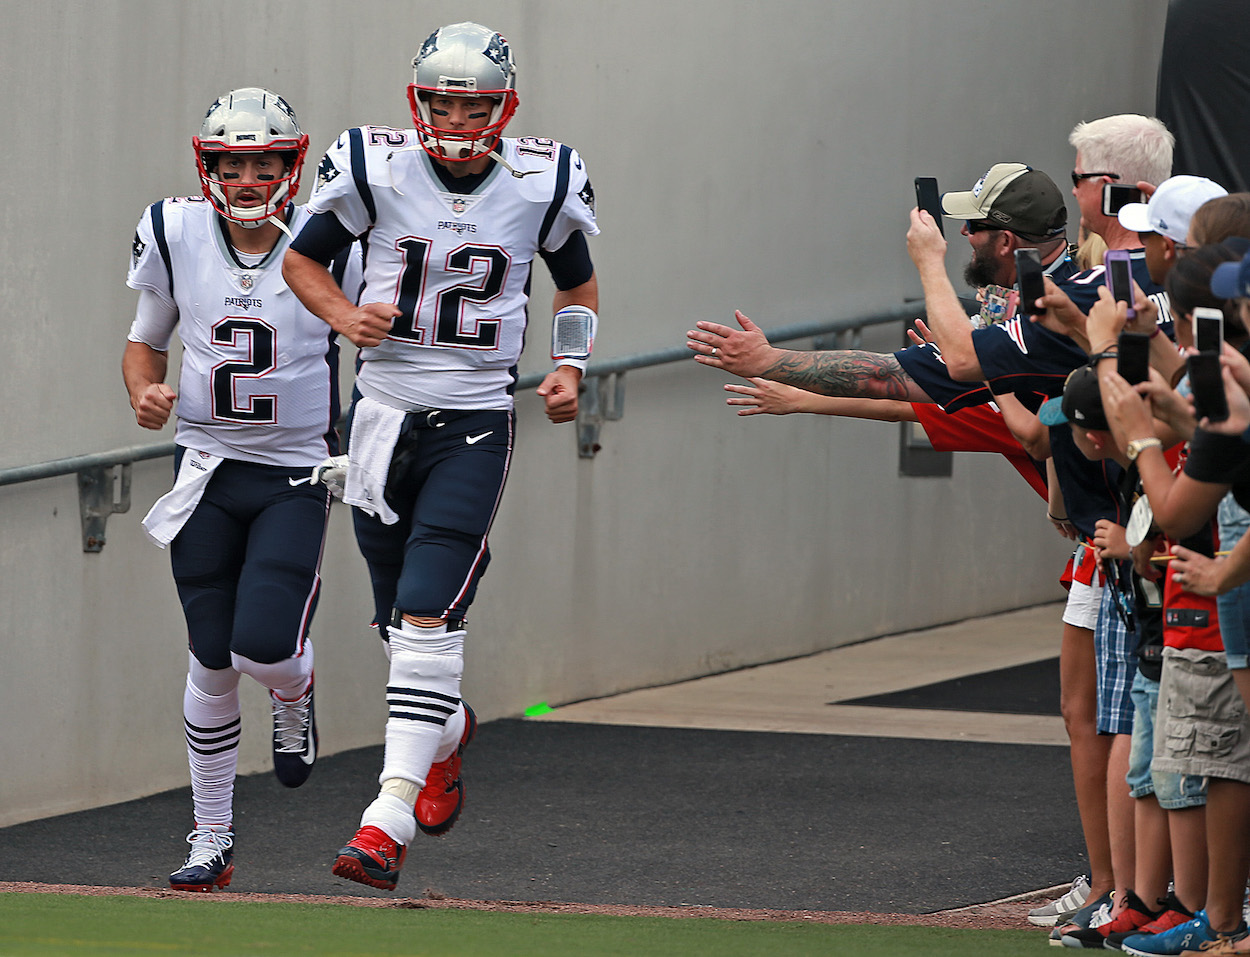 Quarterbacks Brian Hoyer and Tom Brady of the New England Patriots run out onto the field before the NFL game against the Jacksonville Jaguars at TIAA Bank Field on September 16, 2018 in Jacksonville, Florida.